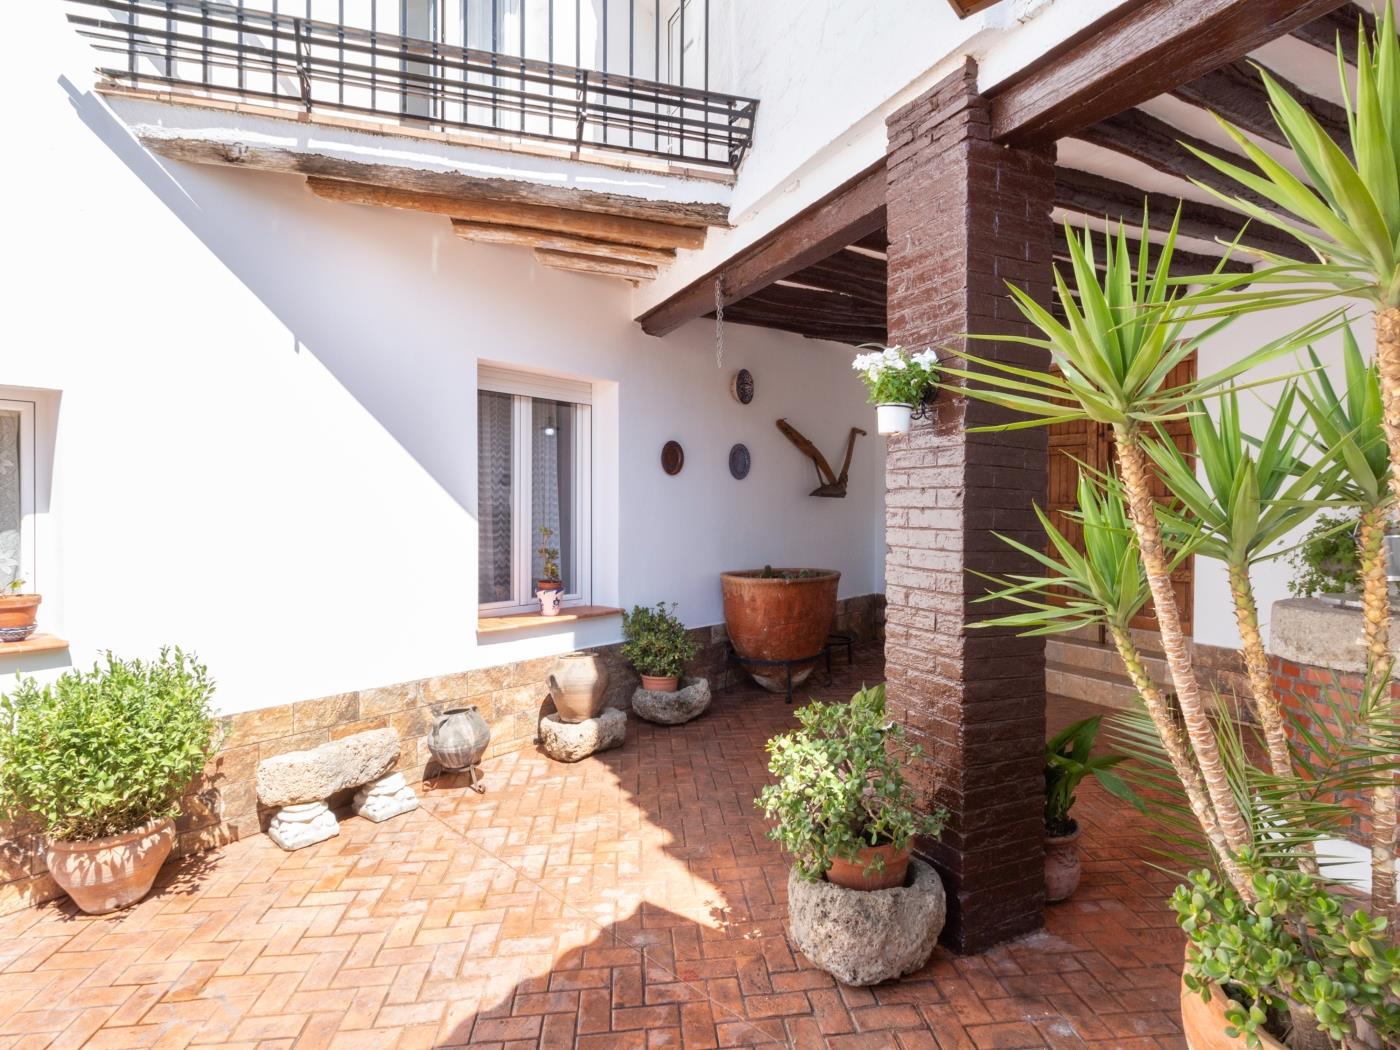 Family house with 4 bedrooms, pool and barbecue in Dúrcal